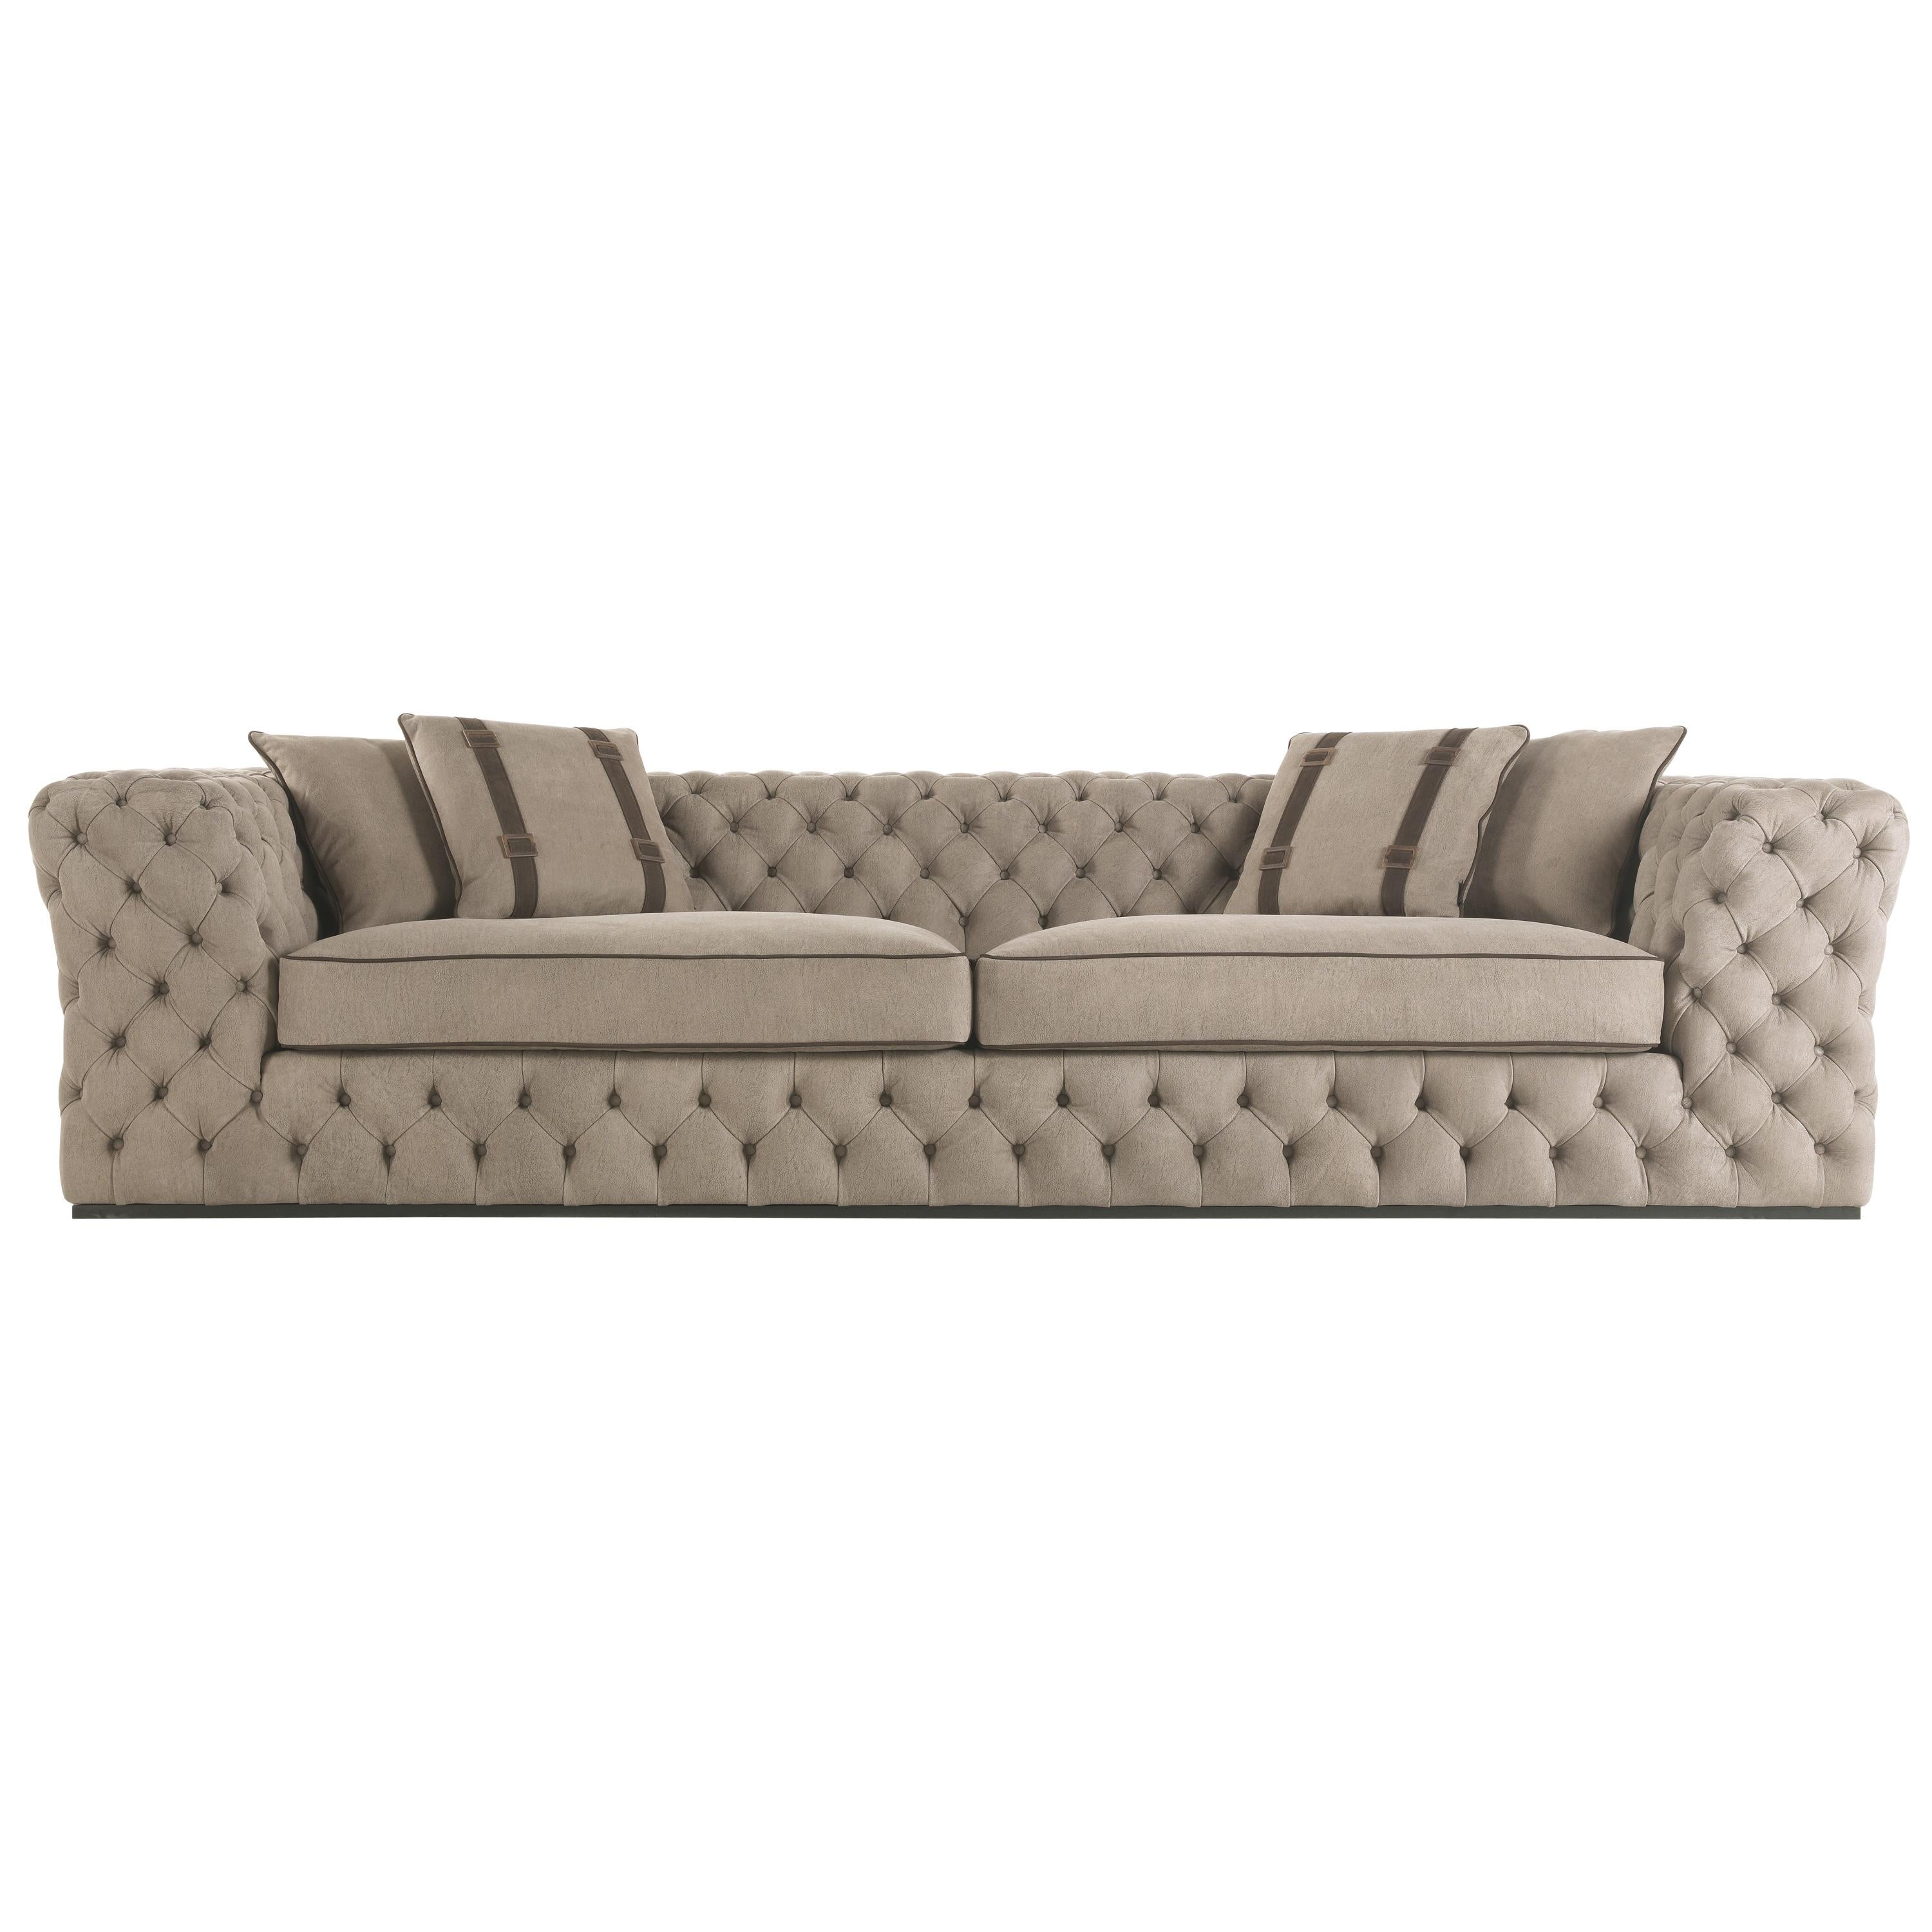 Gianfranco Ferré Home King's Cross Sofa in Leather For Sale at 1stDibs